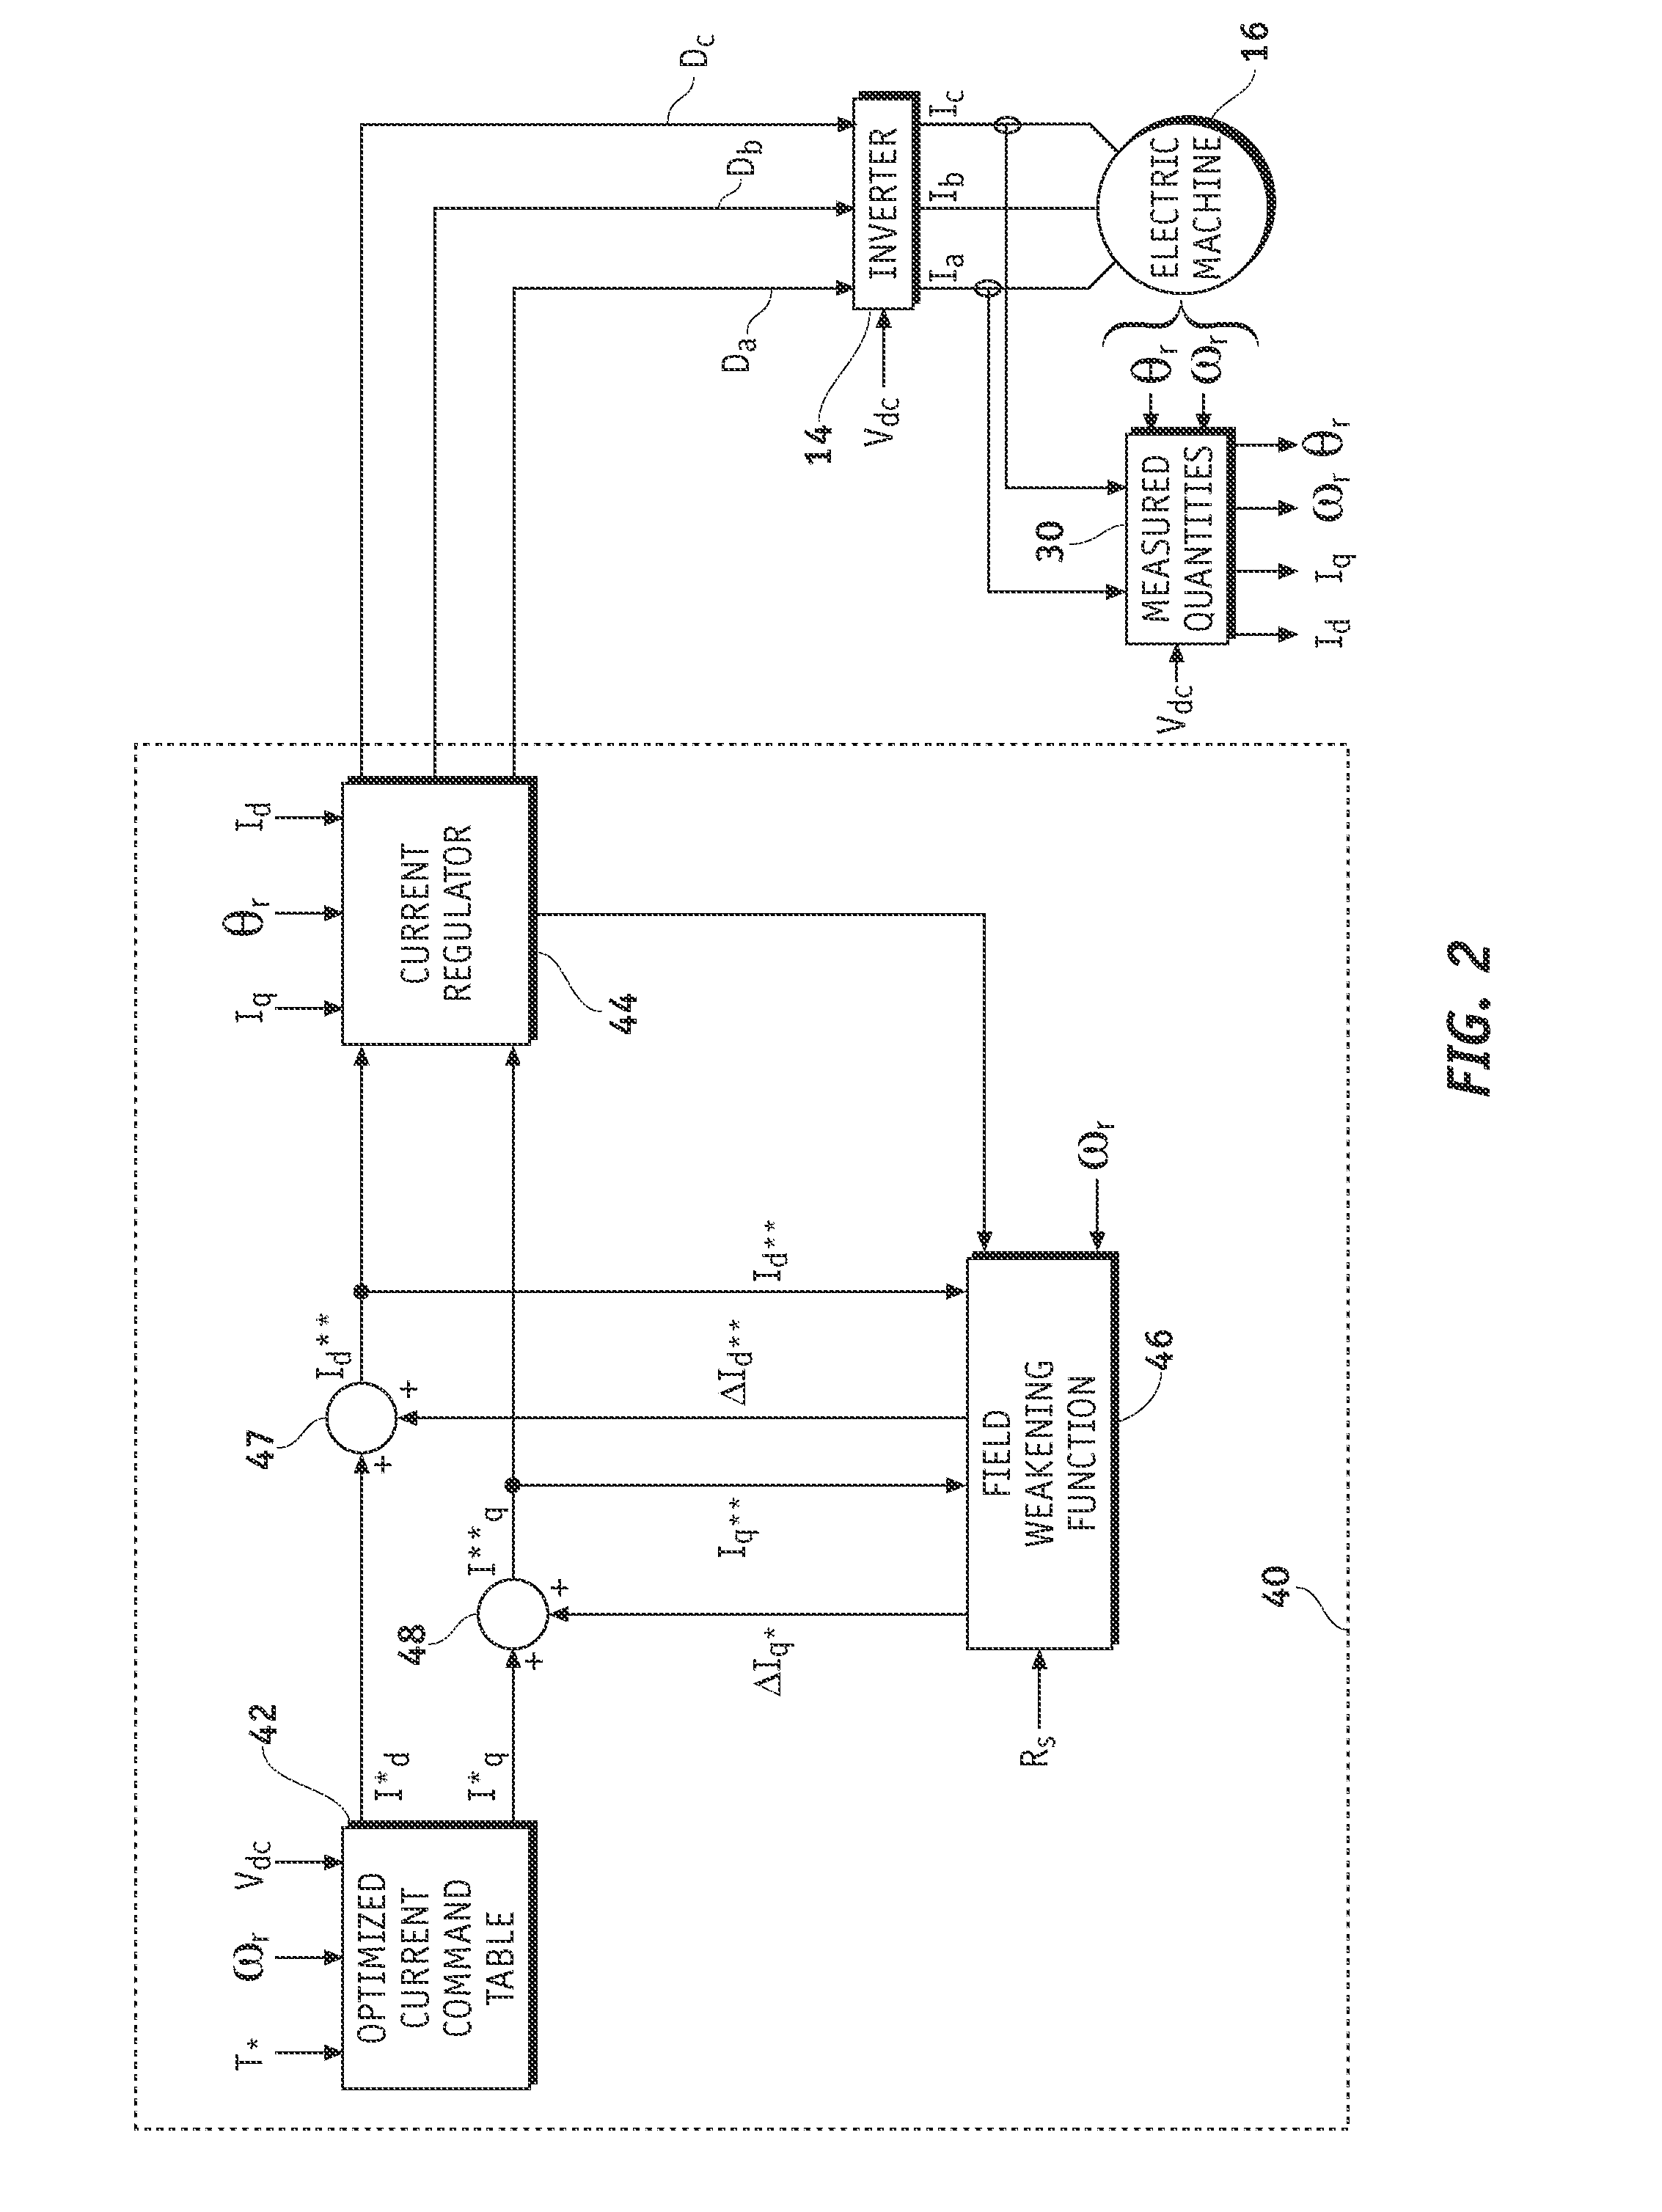 Method and system for controlling permanent magnet AC machines